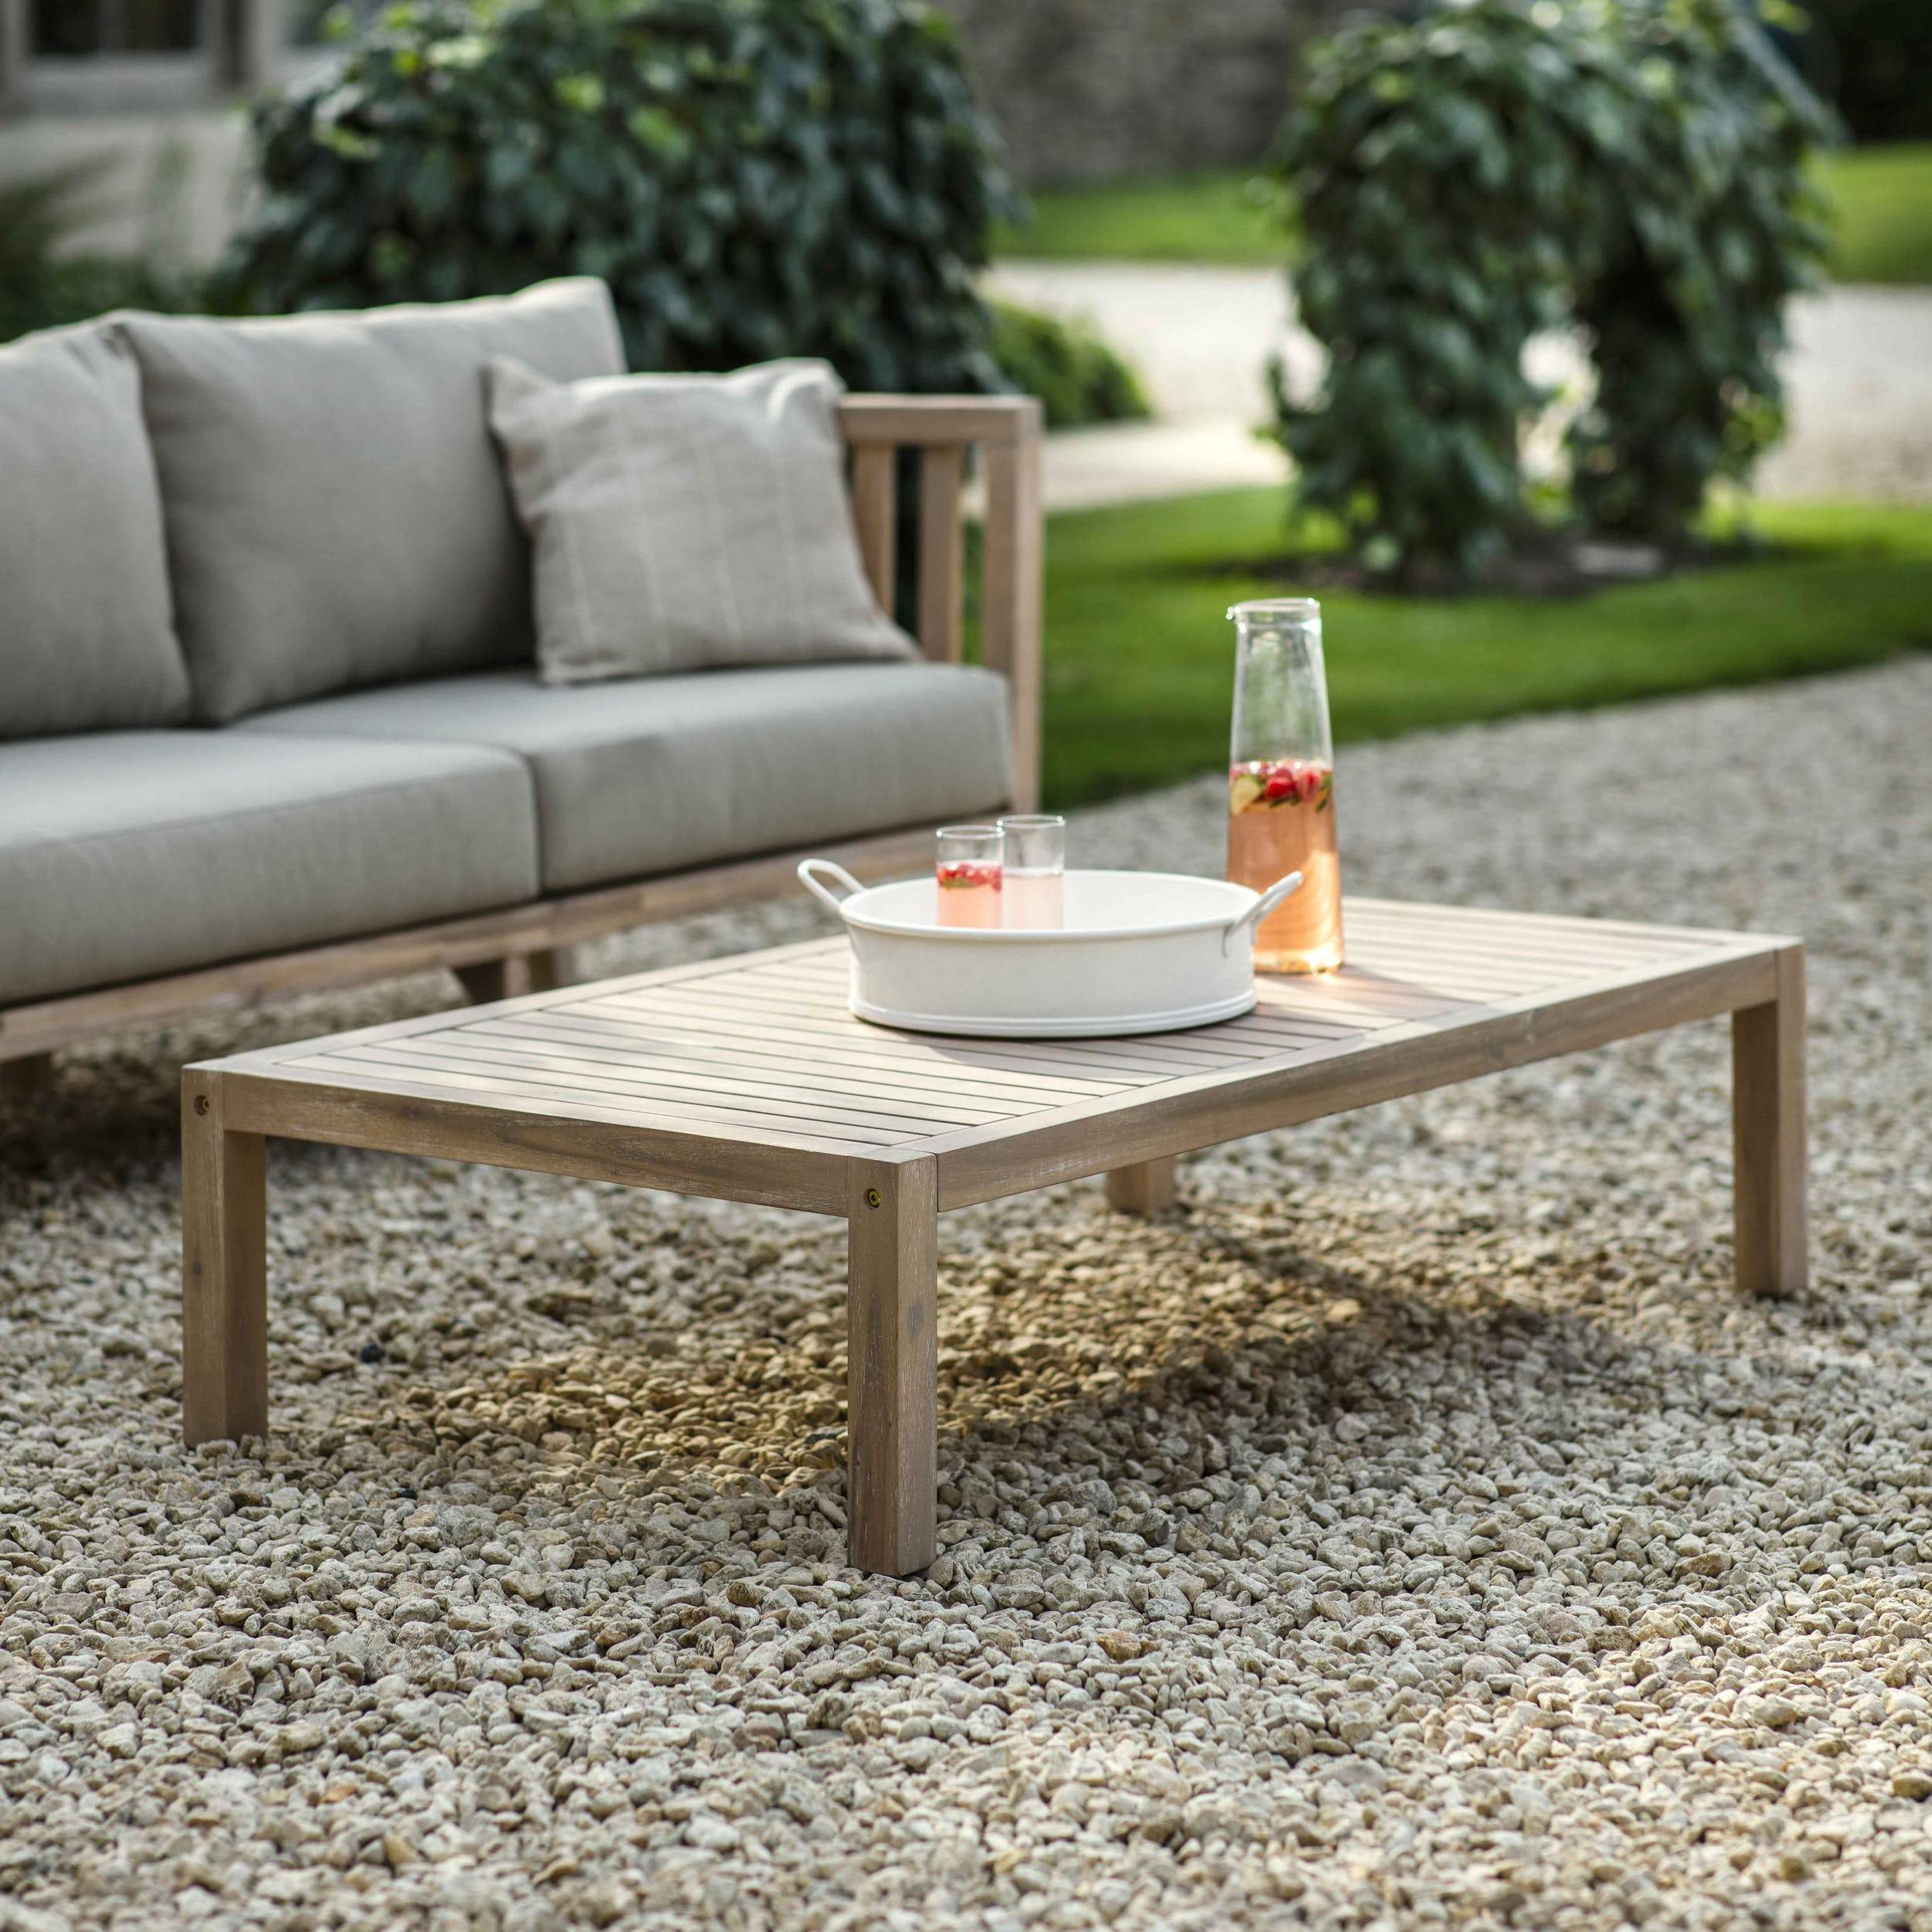 Wooden Porthallow Outdoor Coffee Table – garden trading